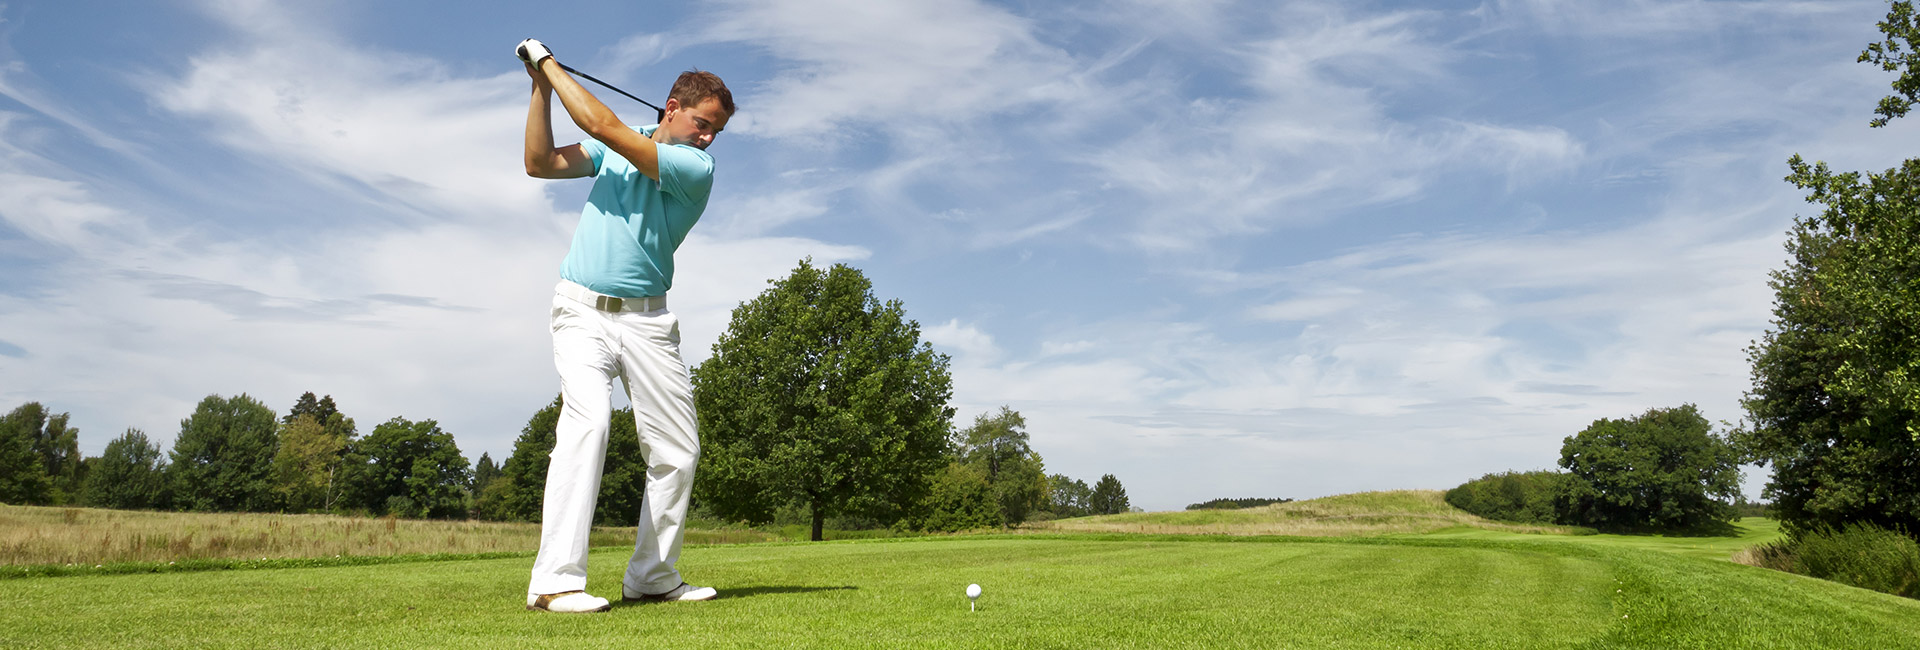 a young golfer mid backswing on the golf course